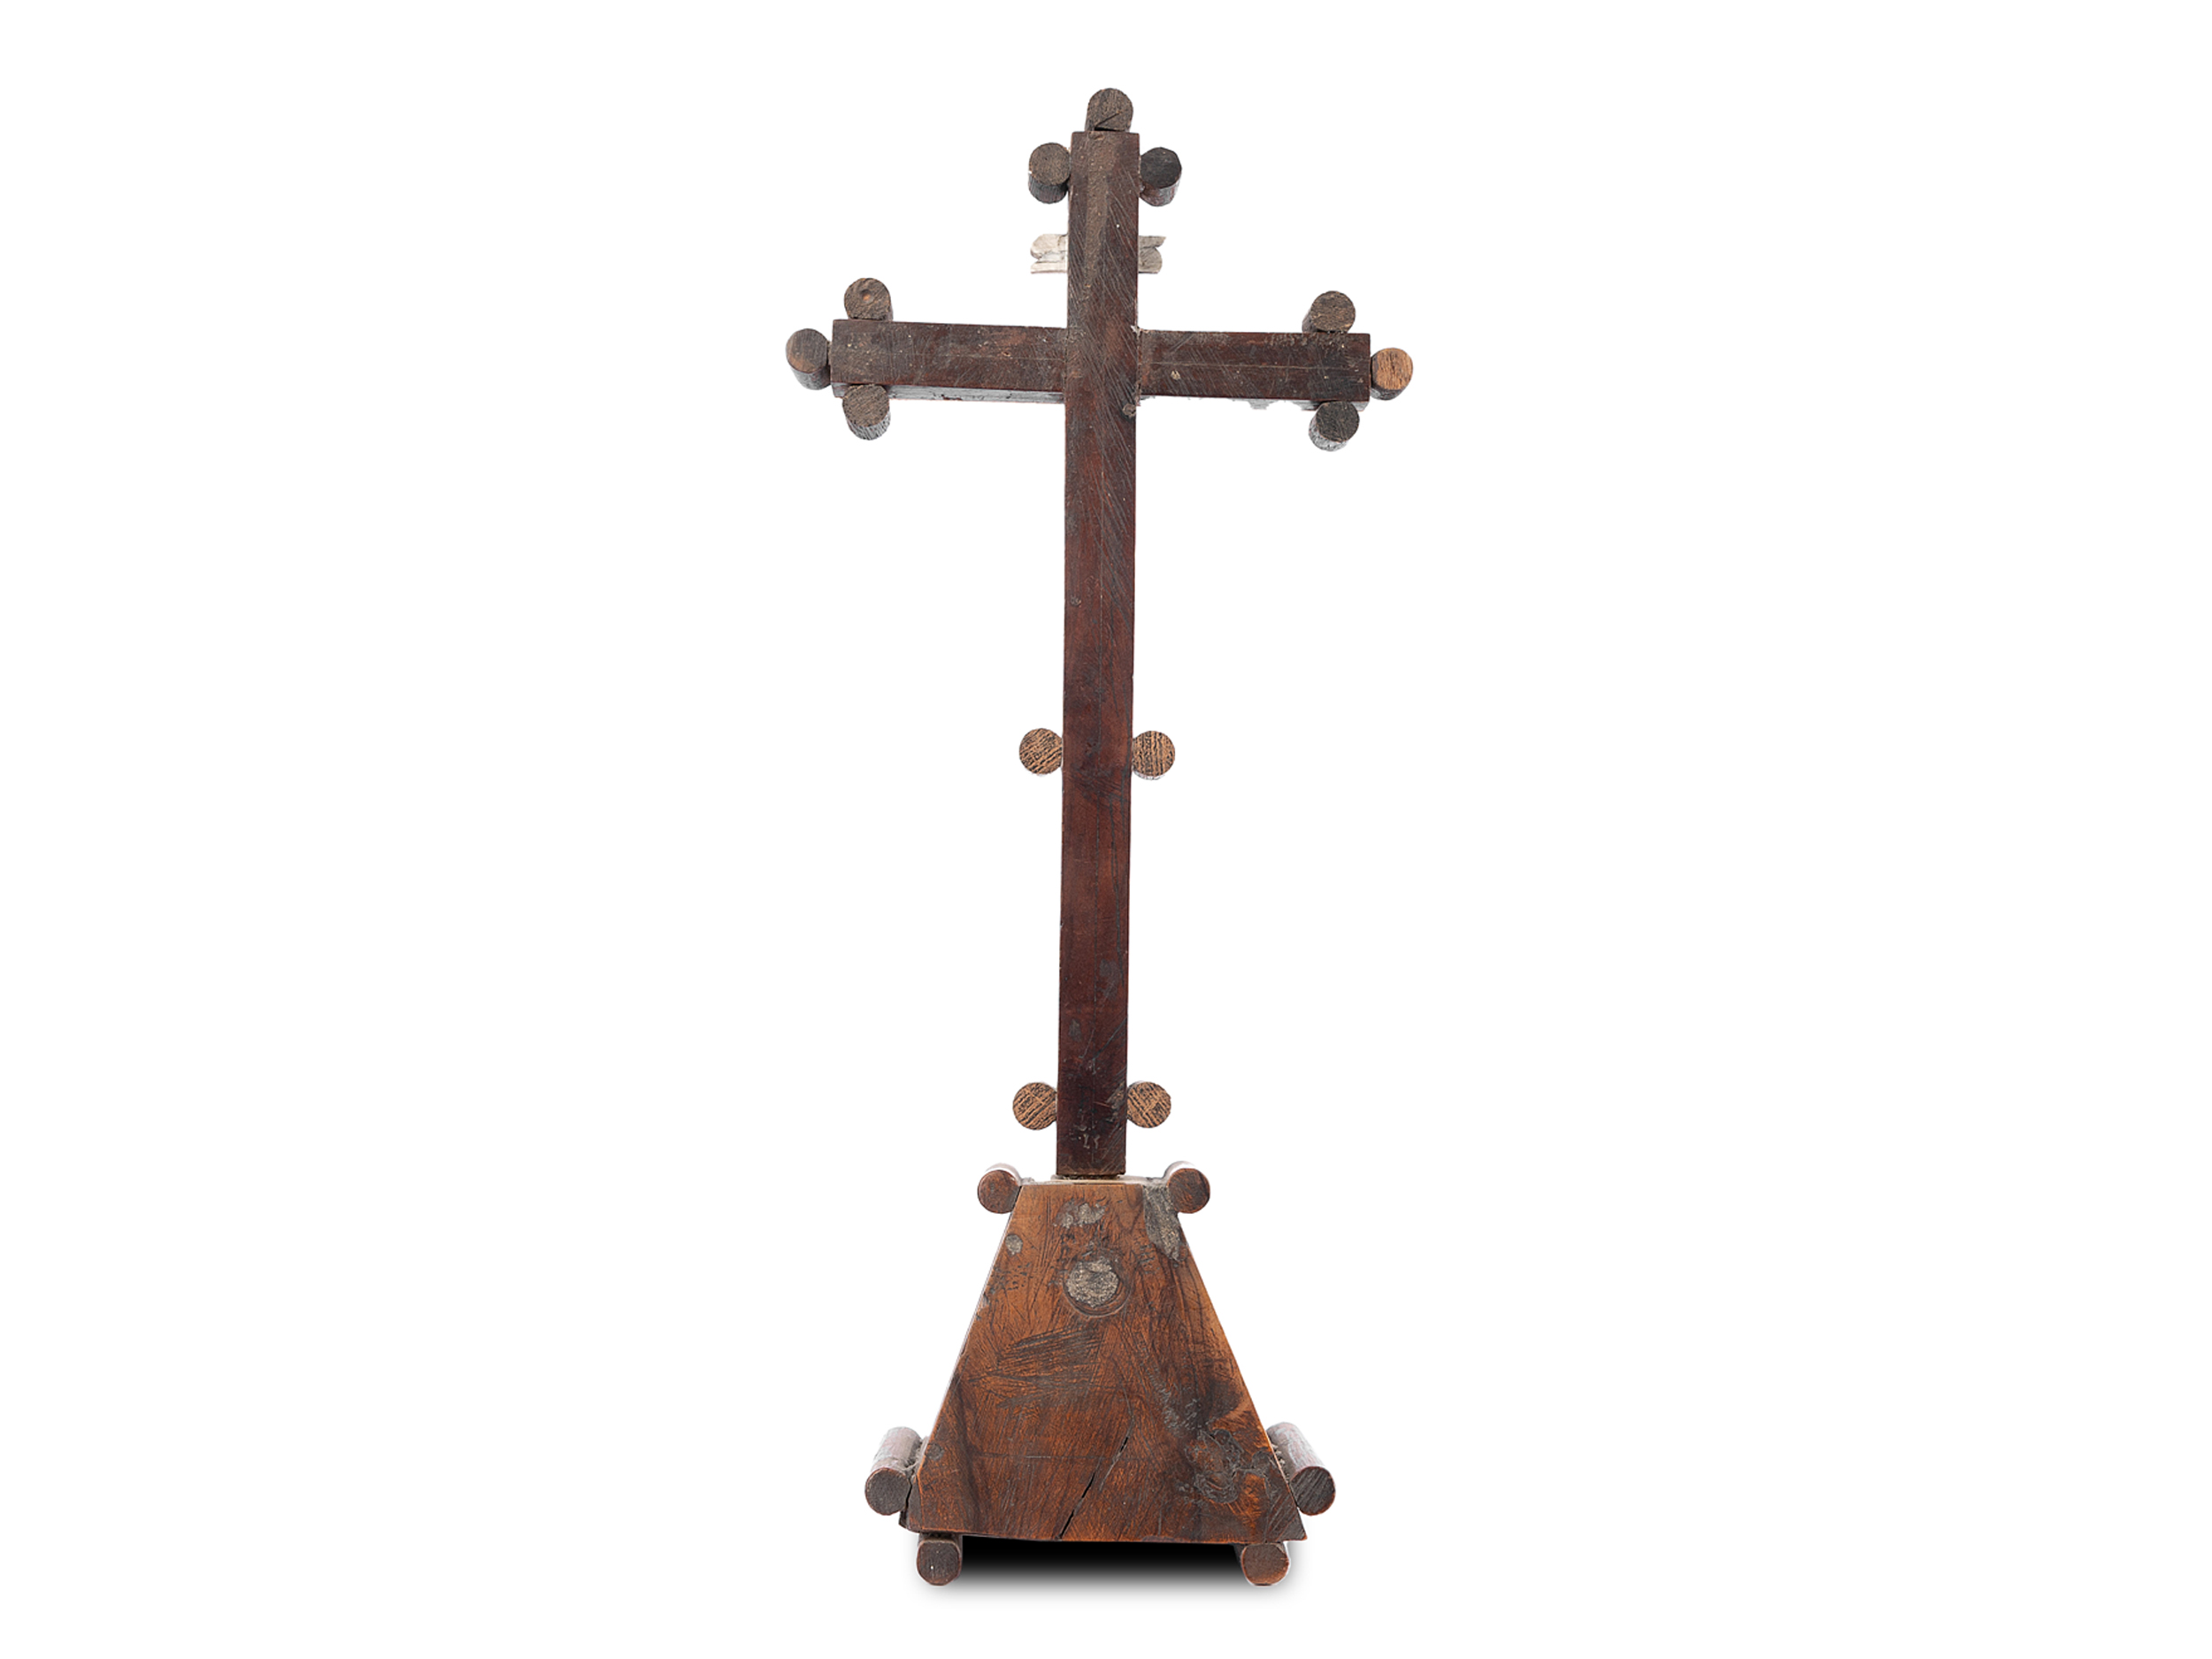 Standing cross, Walnut inlaid with mother-of-pearl & organic material - Image 4 of 5